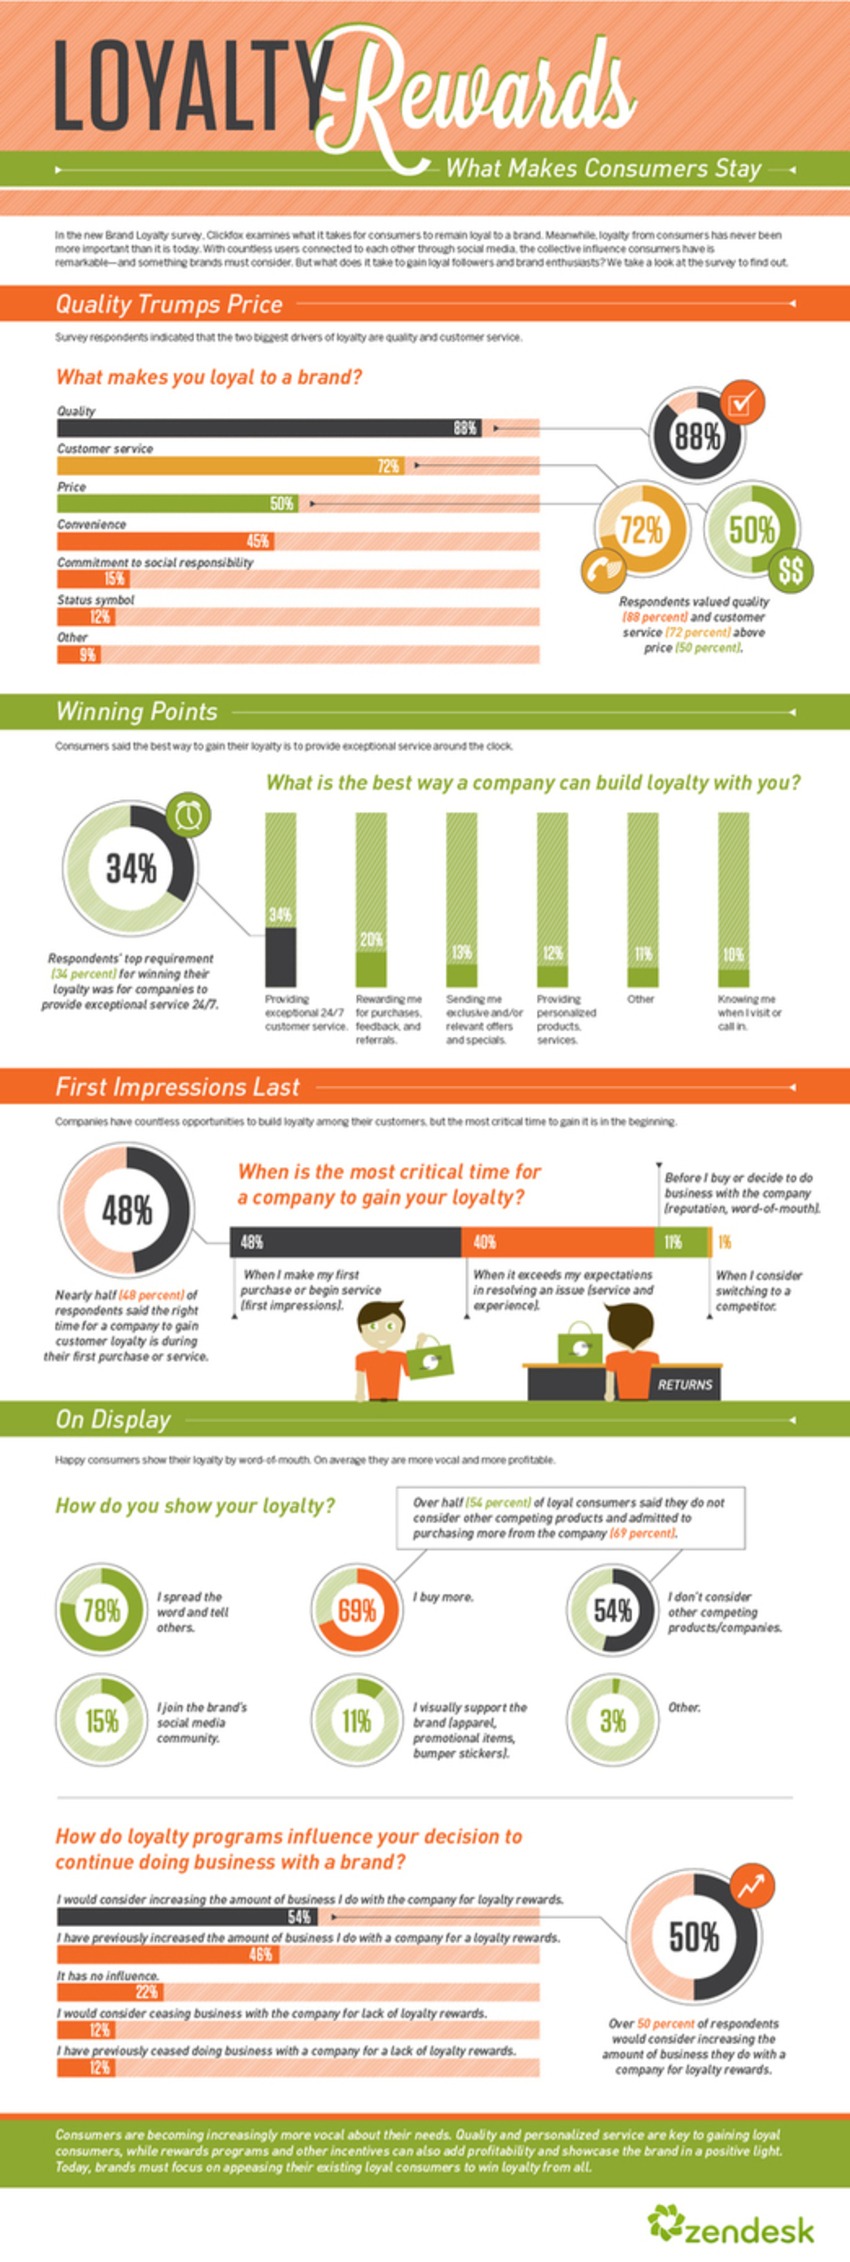 Infographic: What makes customers stay loyal? | The MarTech Digest | Scoop.it